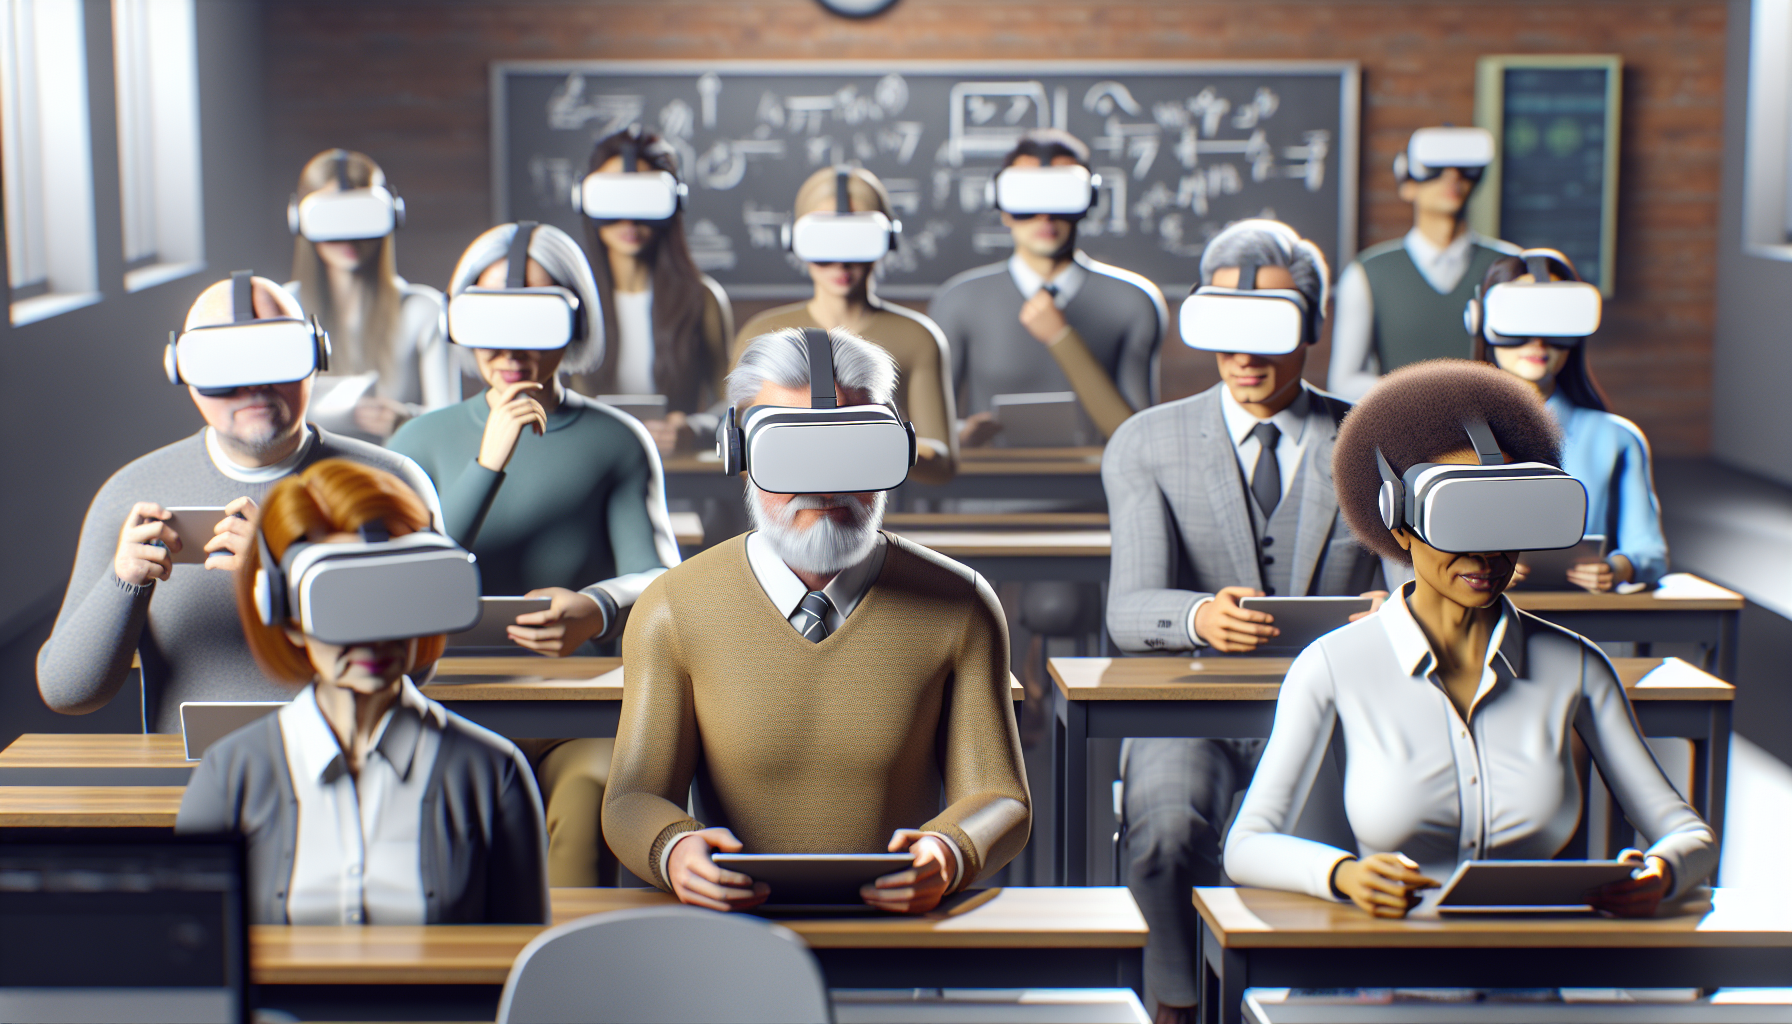 Overview of Virtual Reality in Education